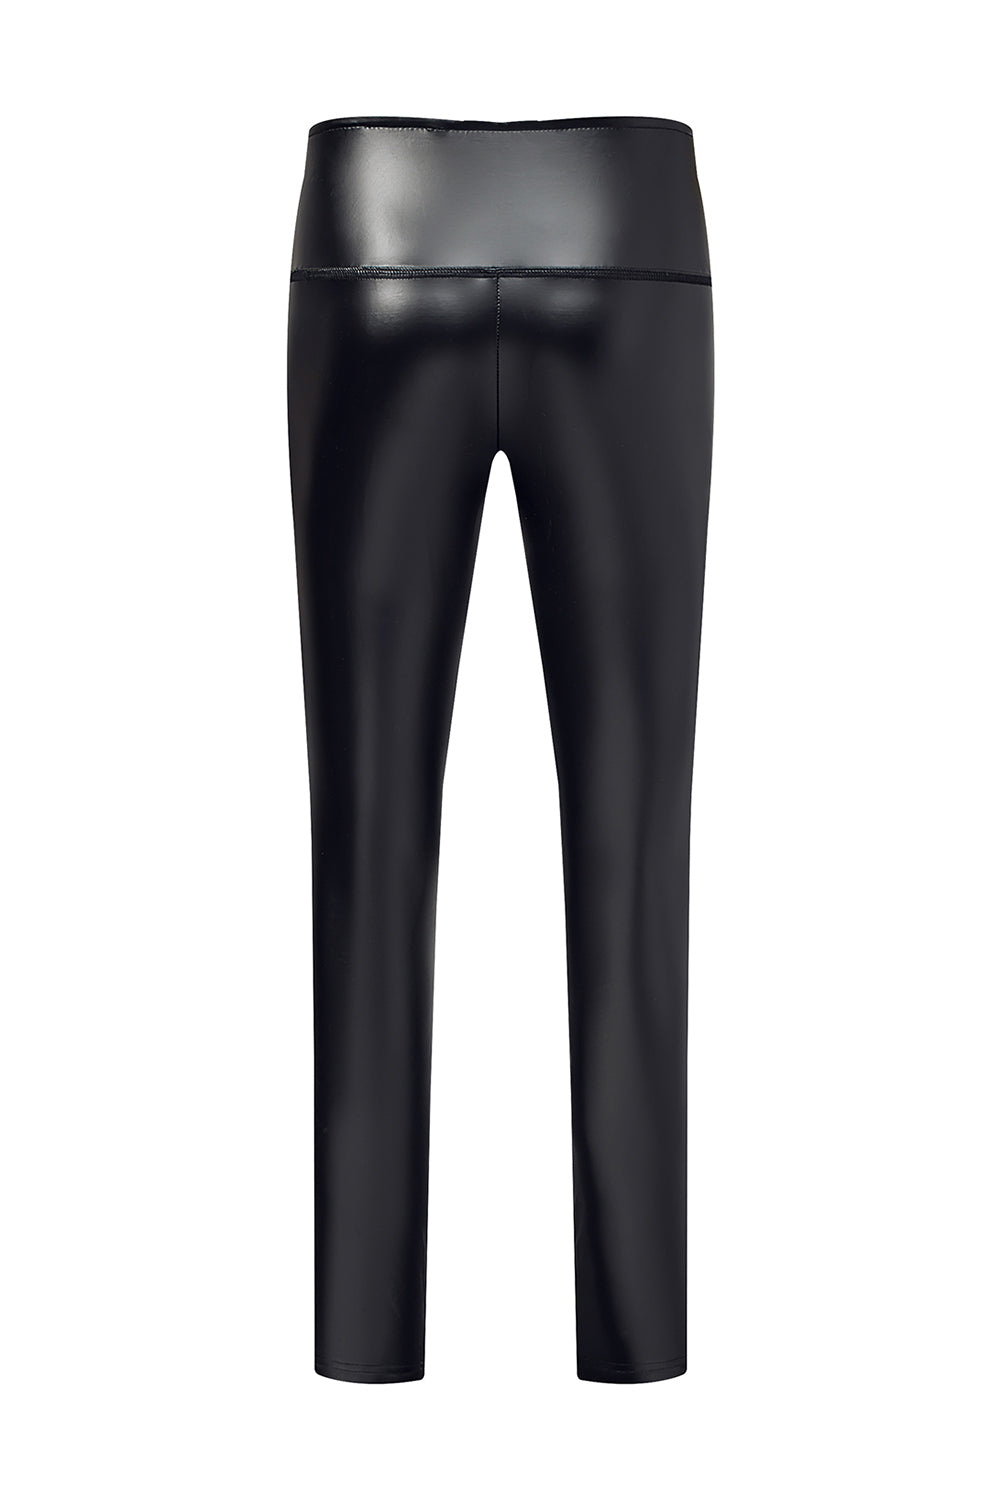 Black Faux Leather Casual High Waisted Leggings